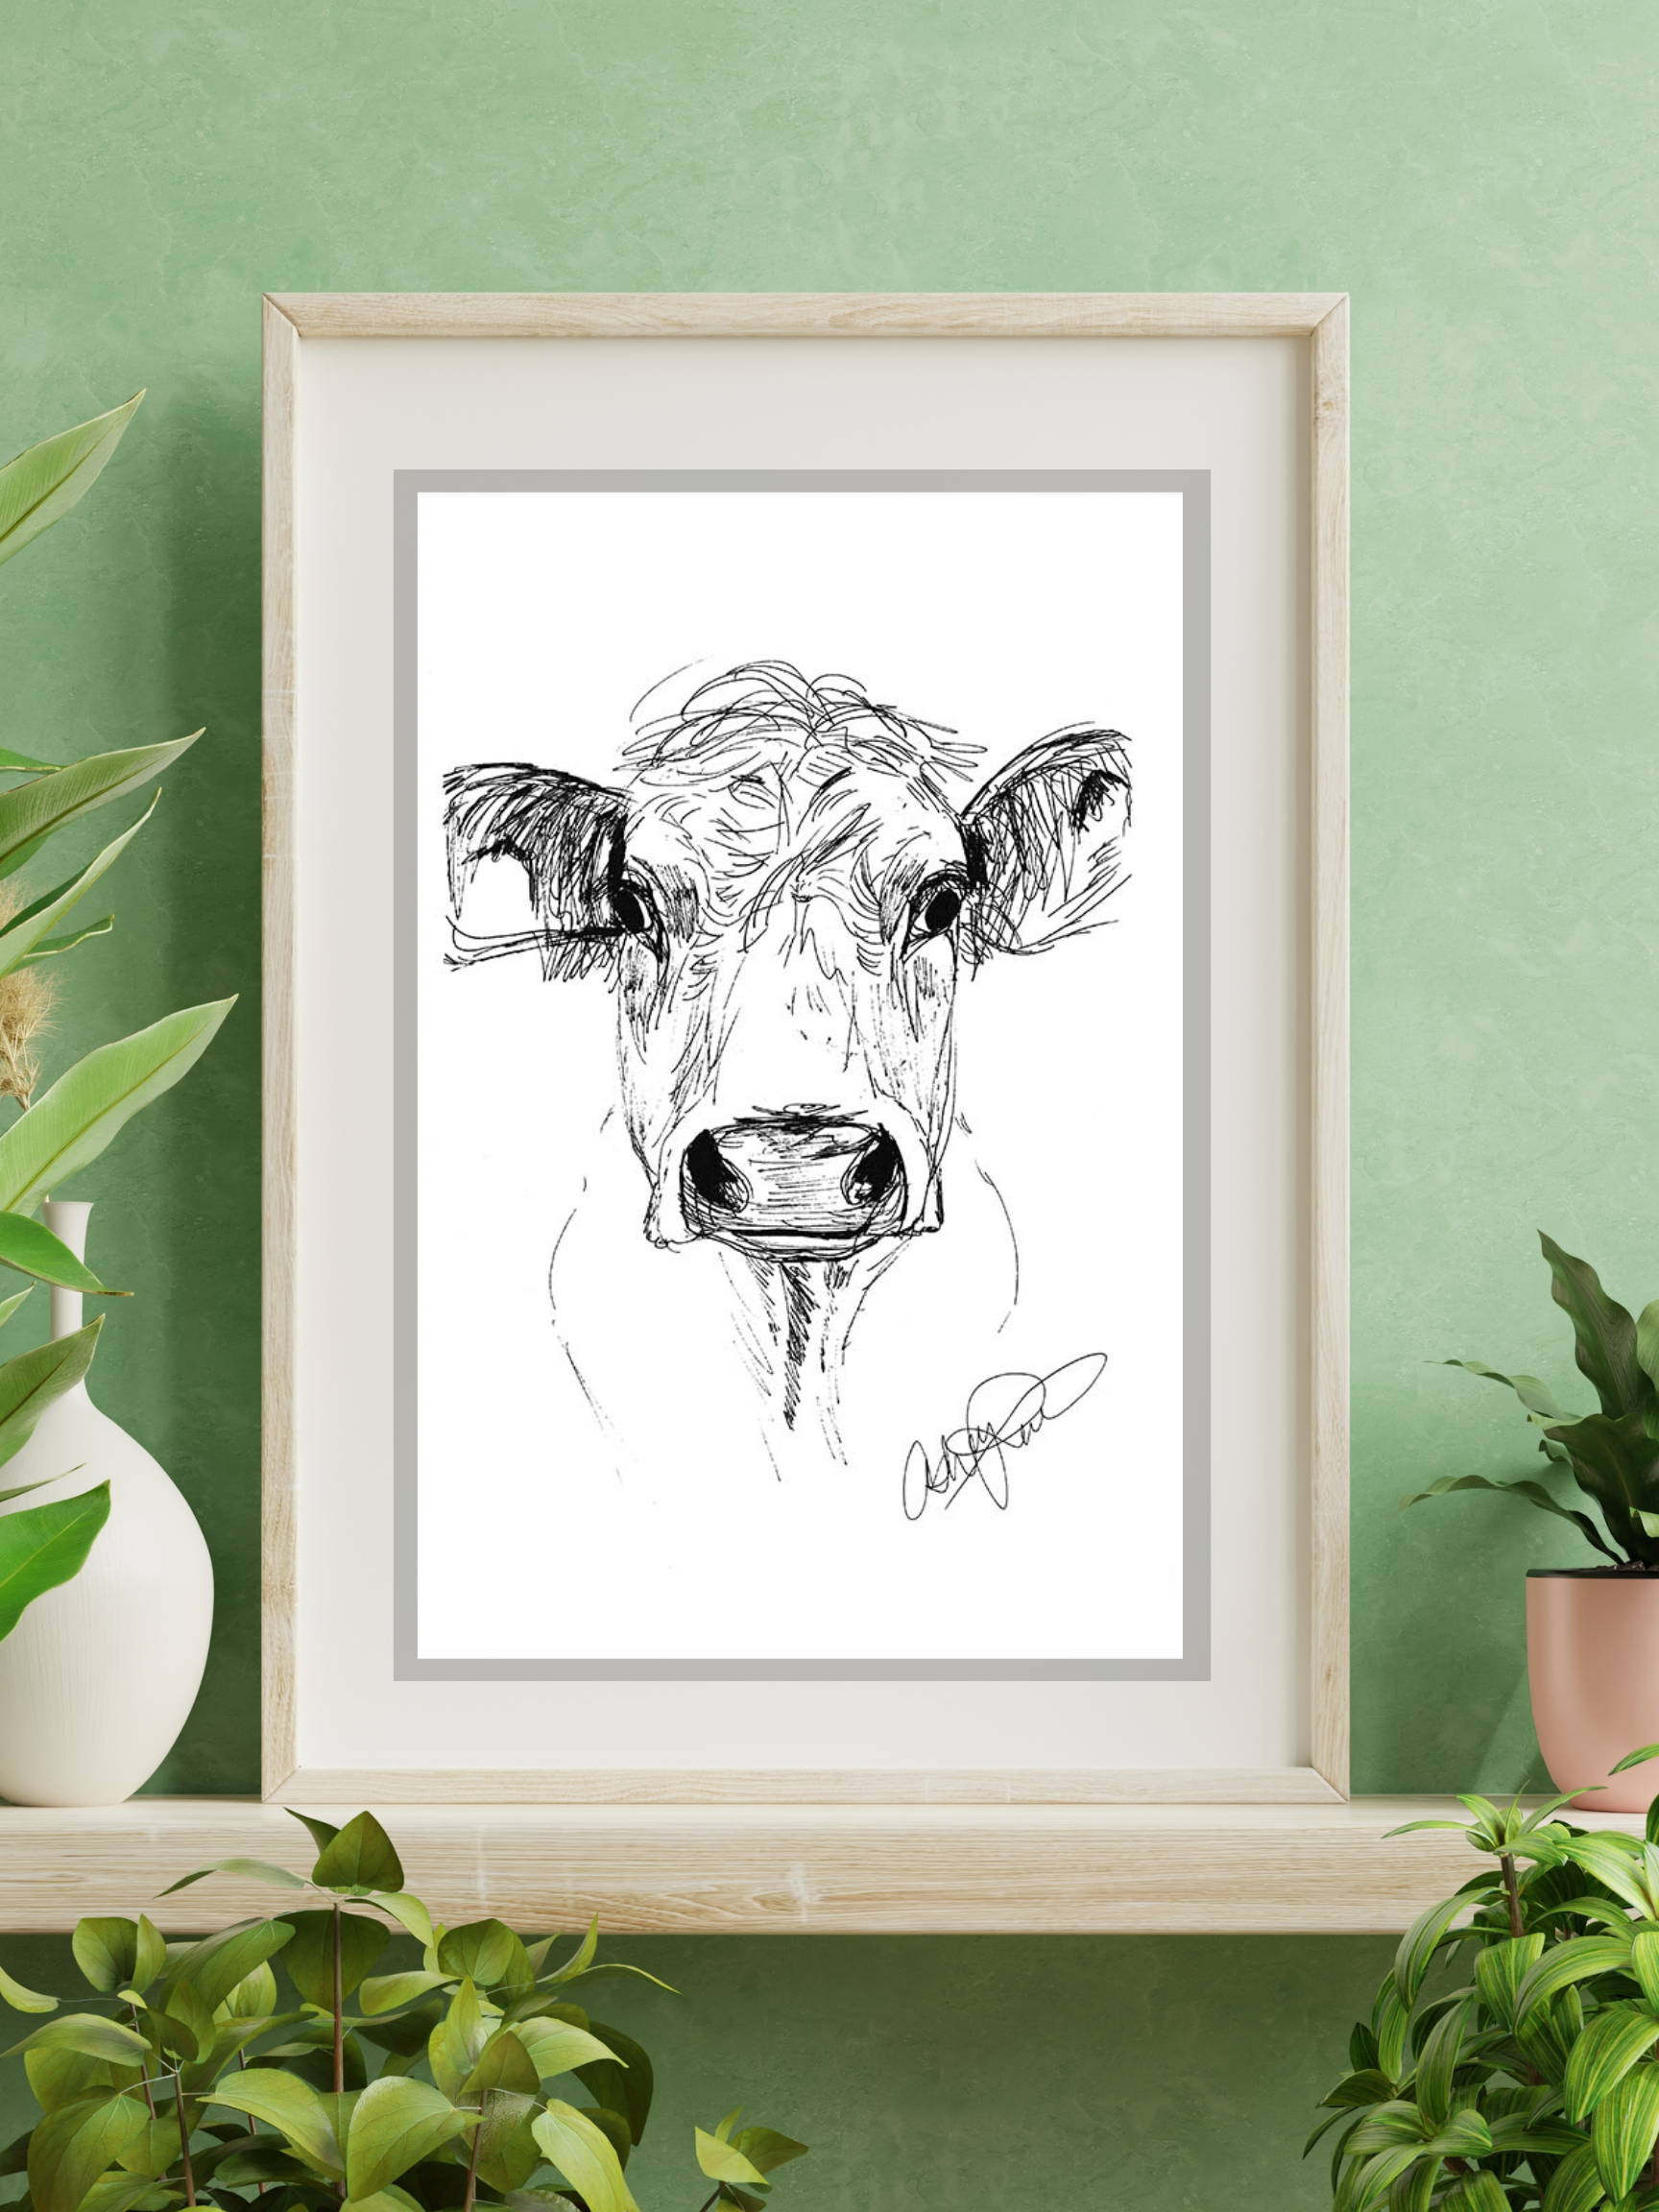 Learn How to Draw a Cow in This Step by Step Tutorial